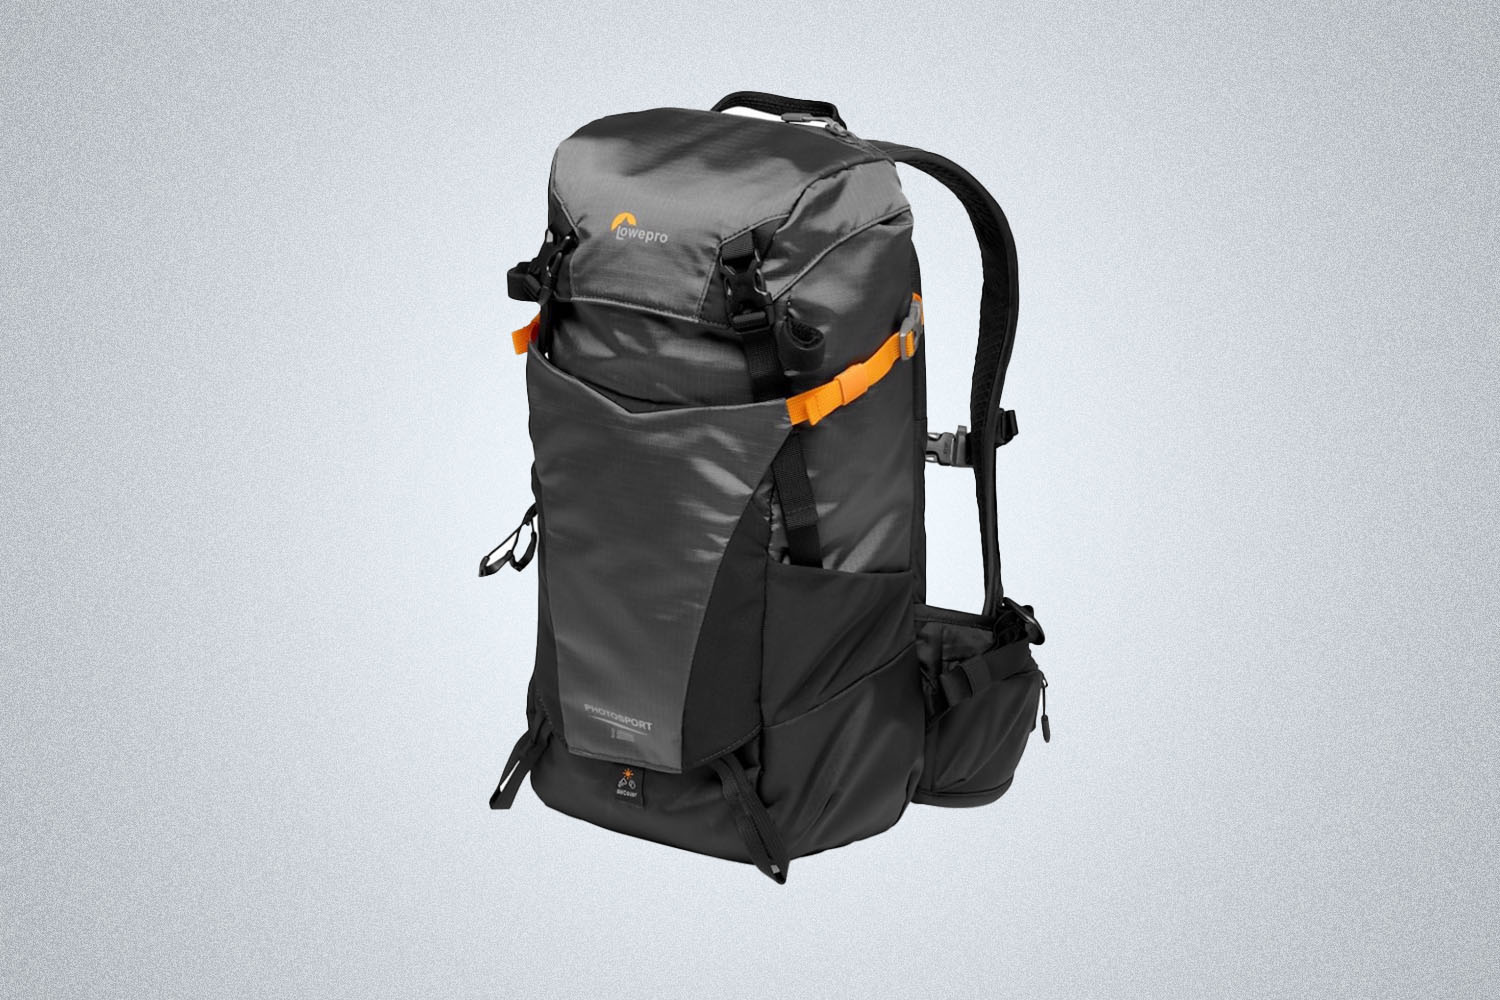 The LowePro PhotoSport Backpack on a gray background